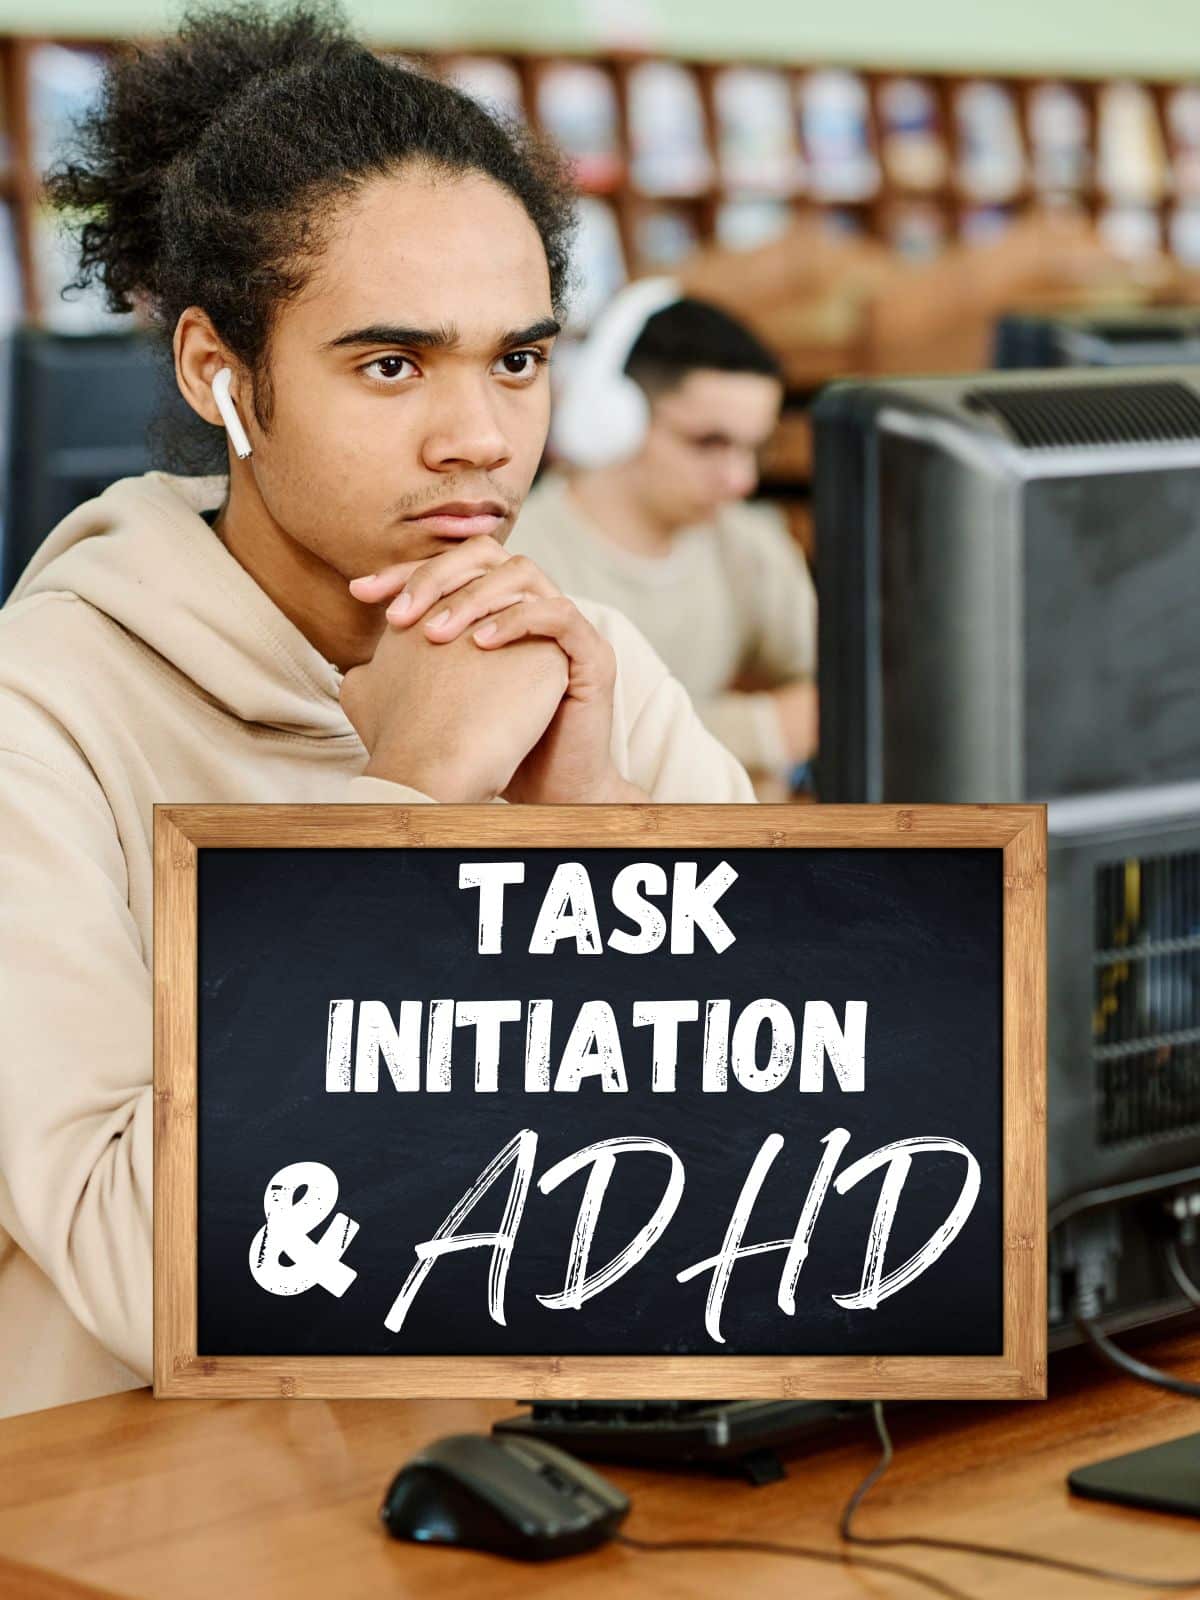 A teenager procrastinating with the text "Task Initiation and ADHD."